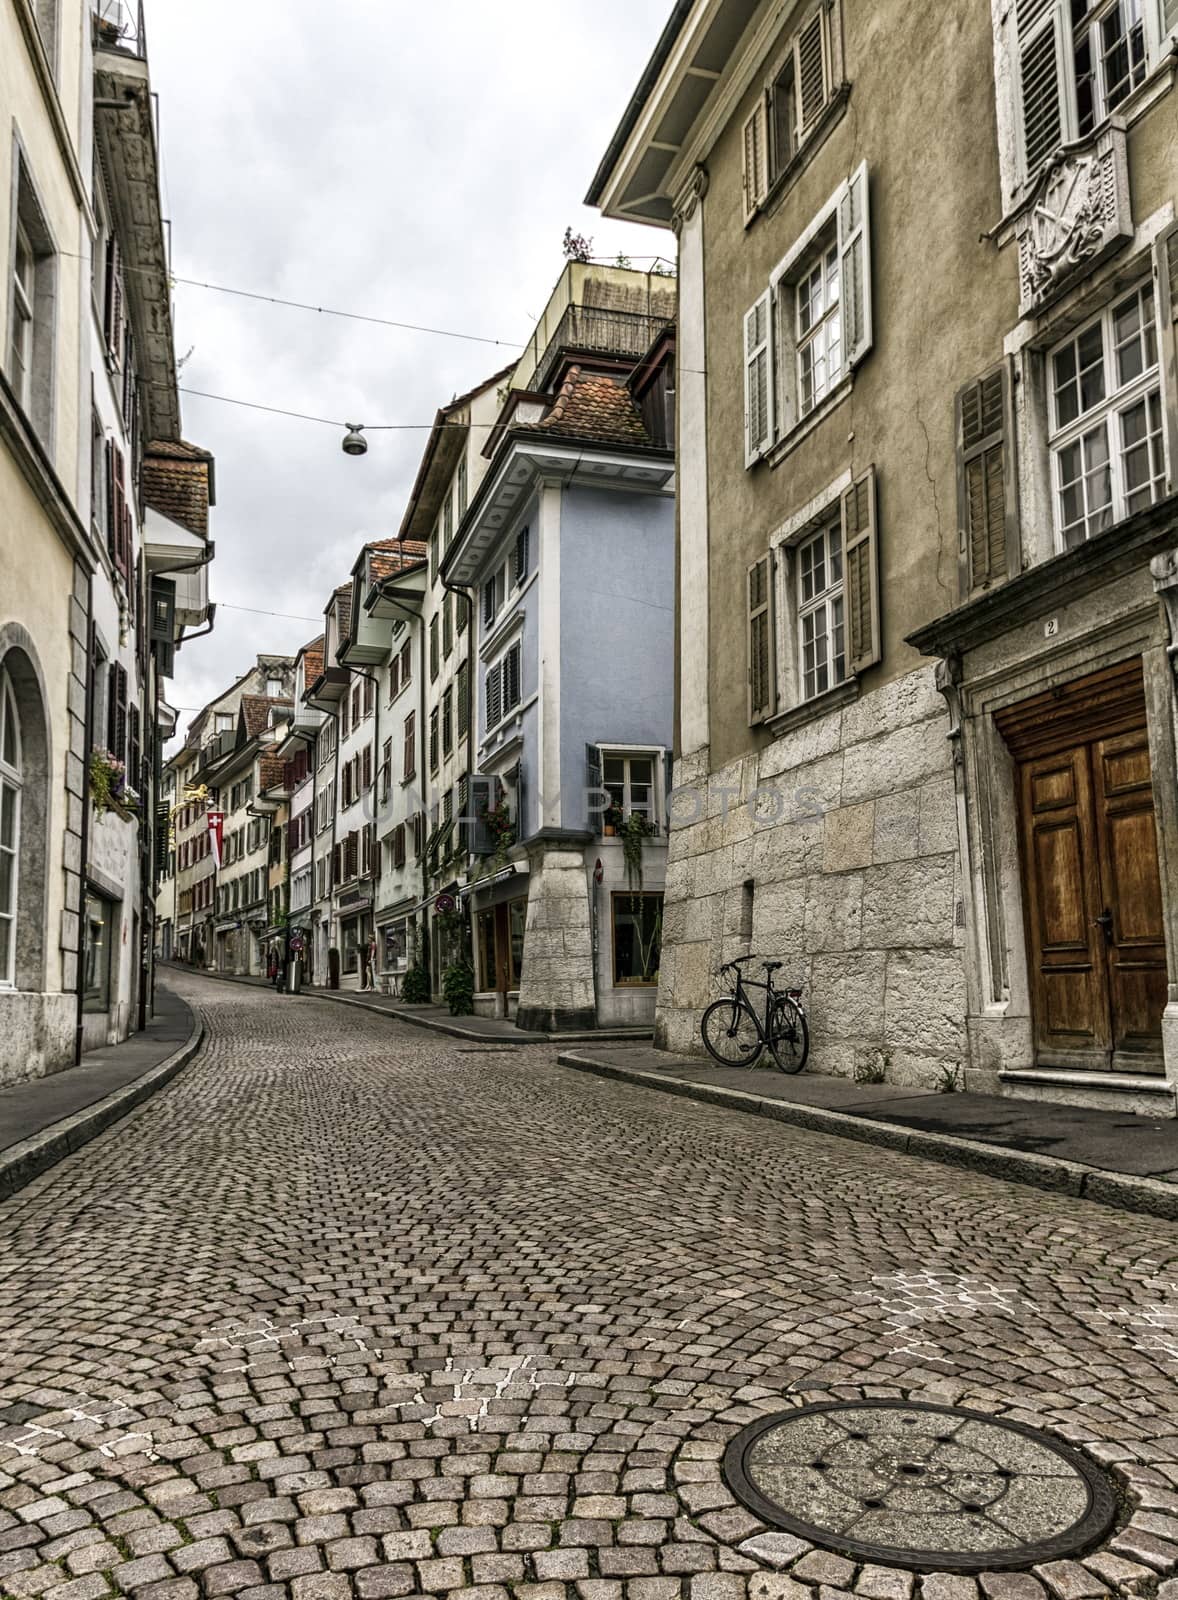 Street in old city of Solothurn by day, Switzerland